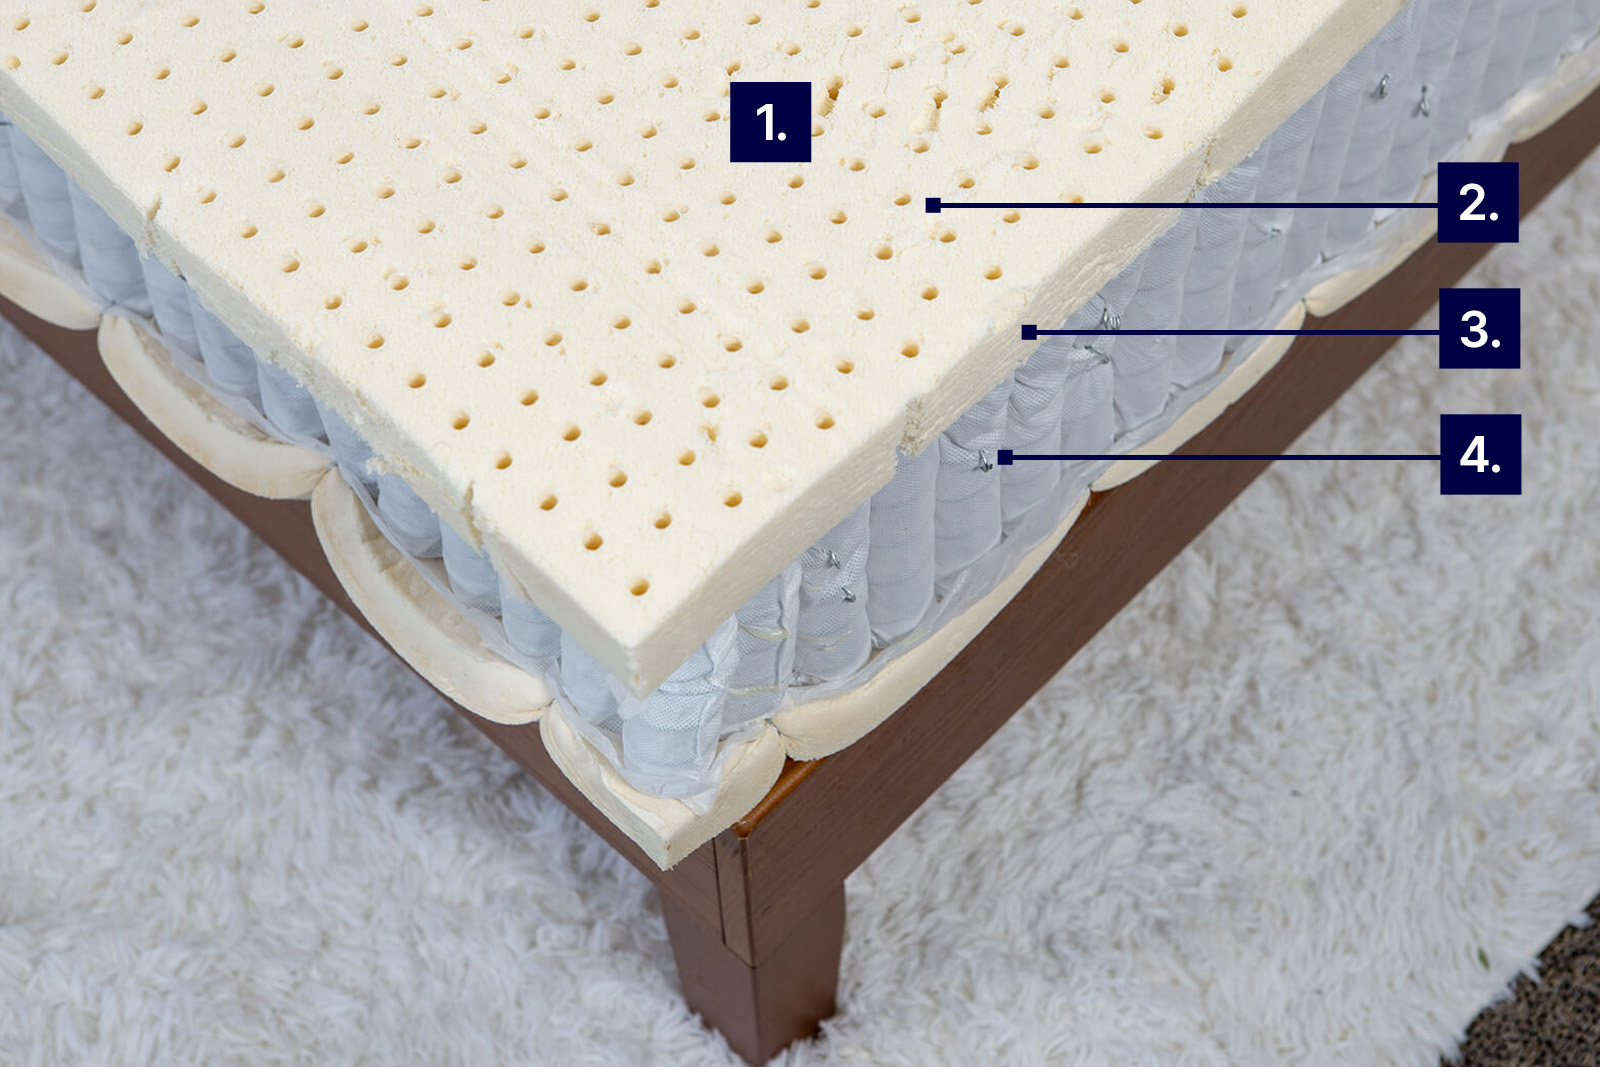 mattress photo from top angle showing Avocado Green mattress with labels to demonstrate cooling features